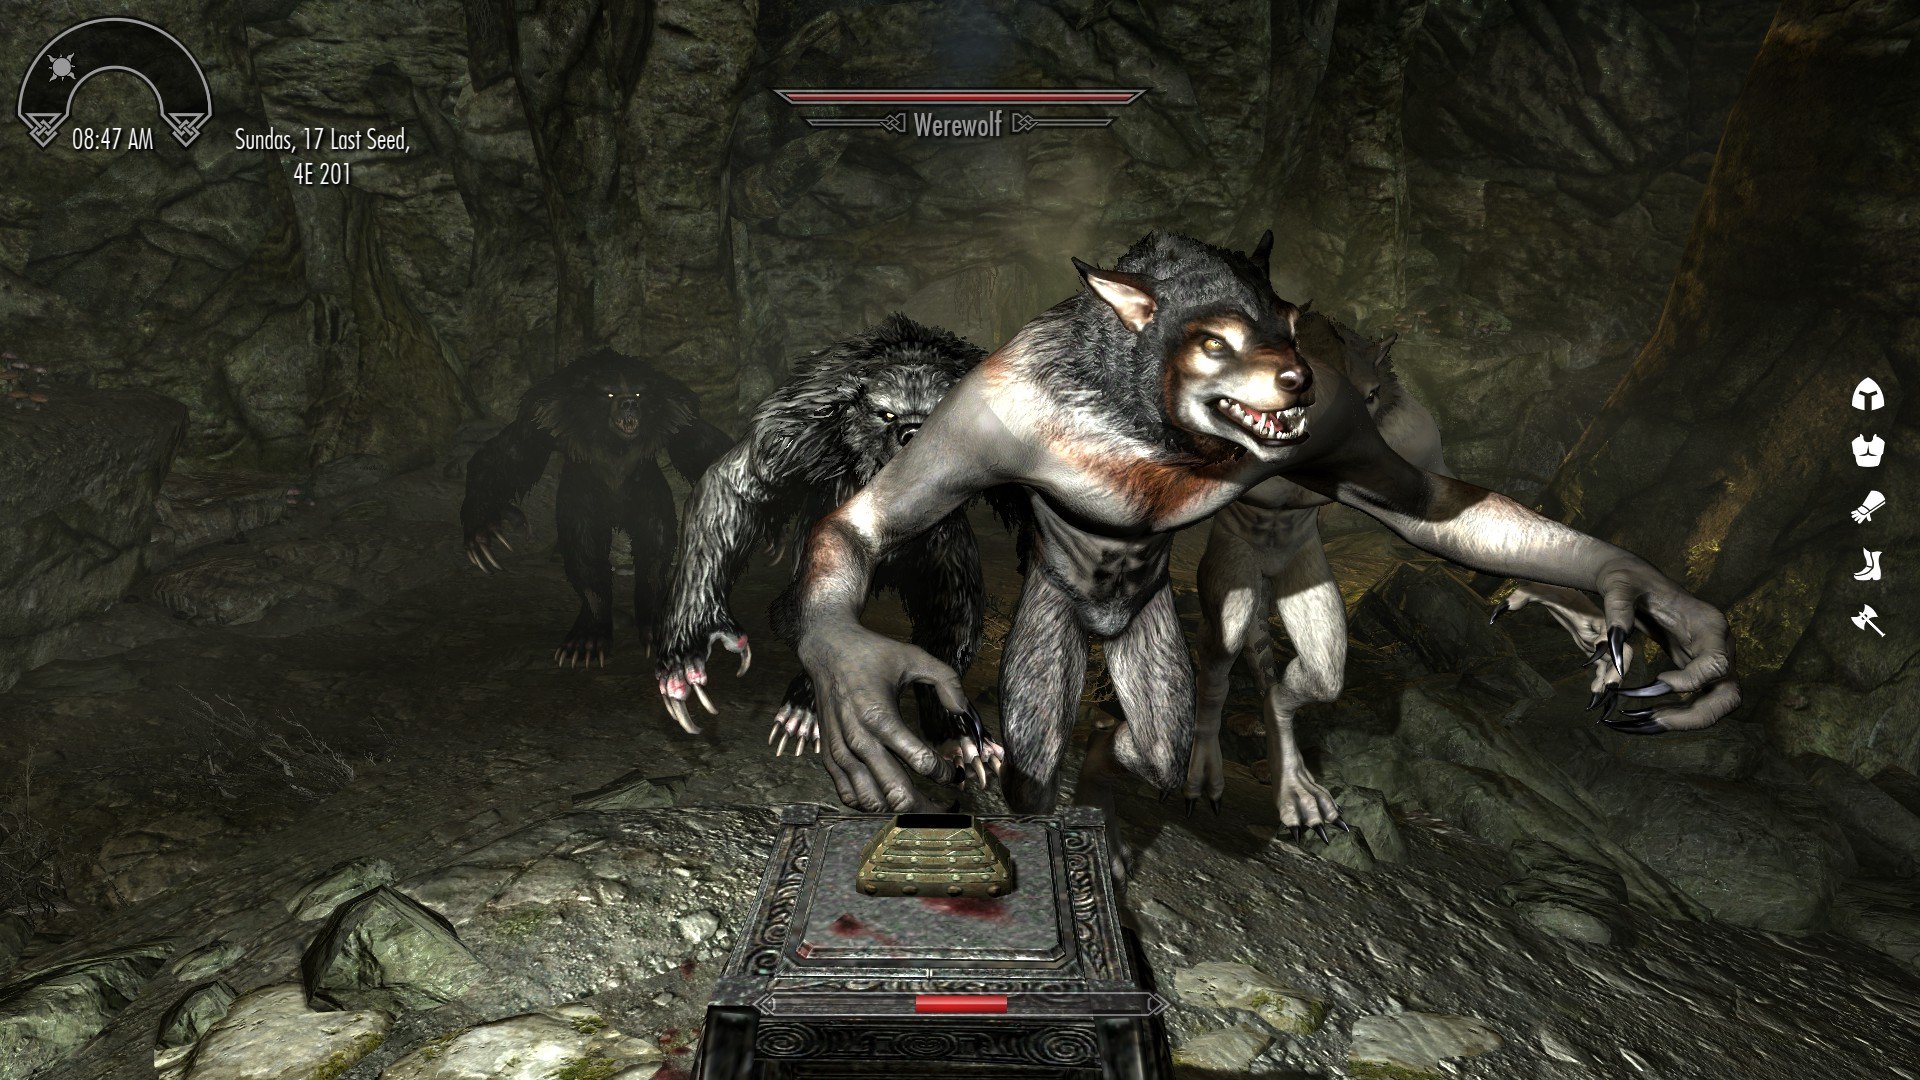 Werewolves and Werebears Distributed - Miscellaneous - AFK Mods